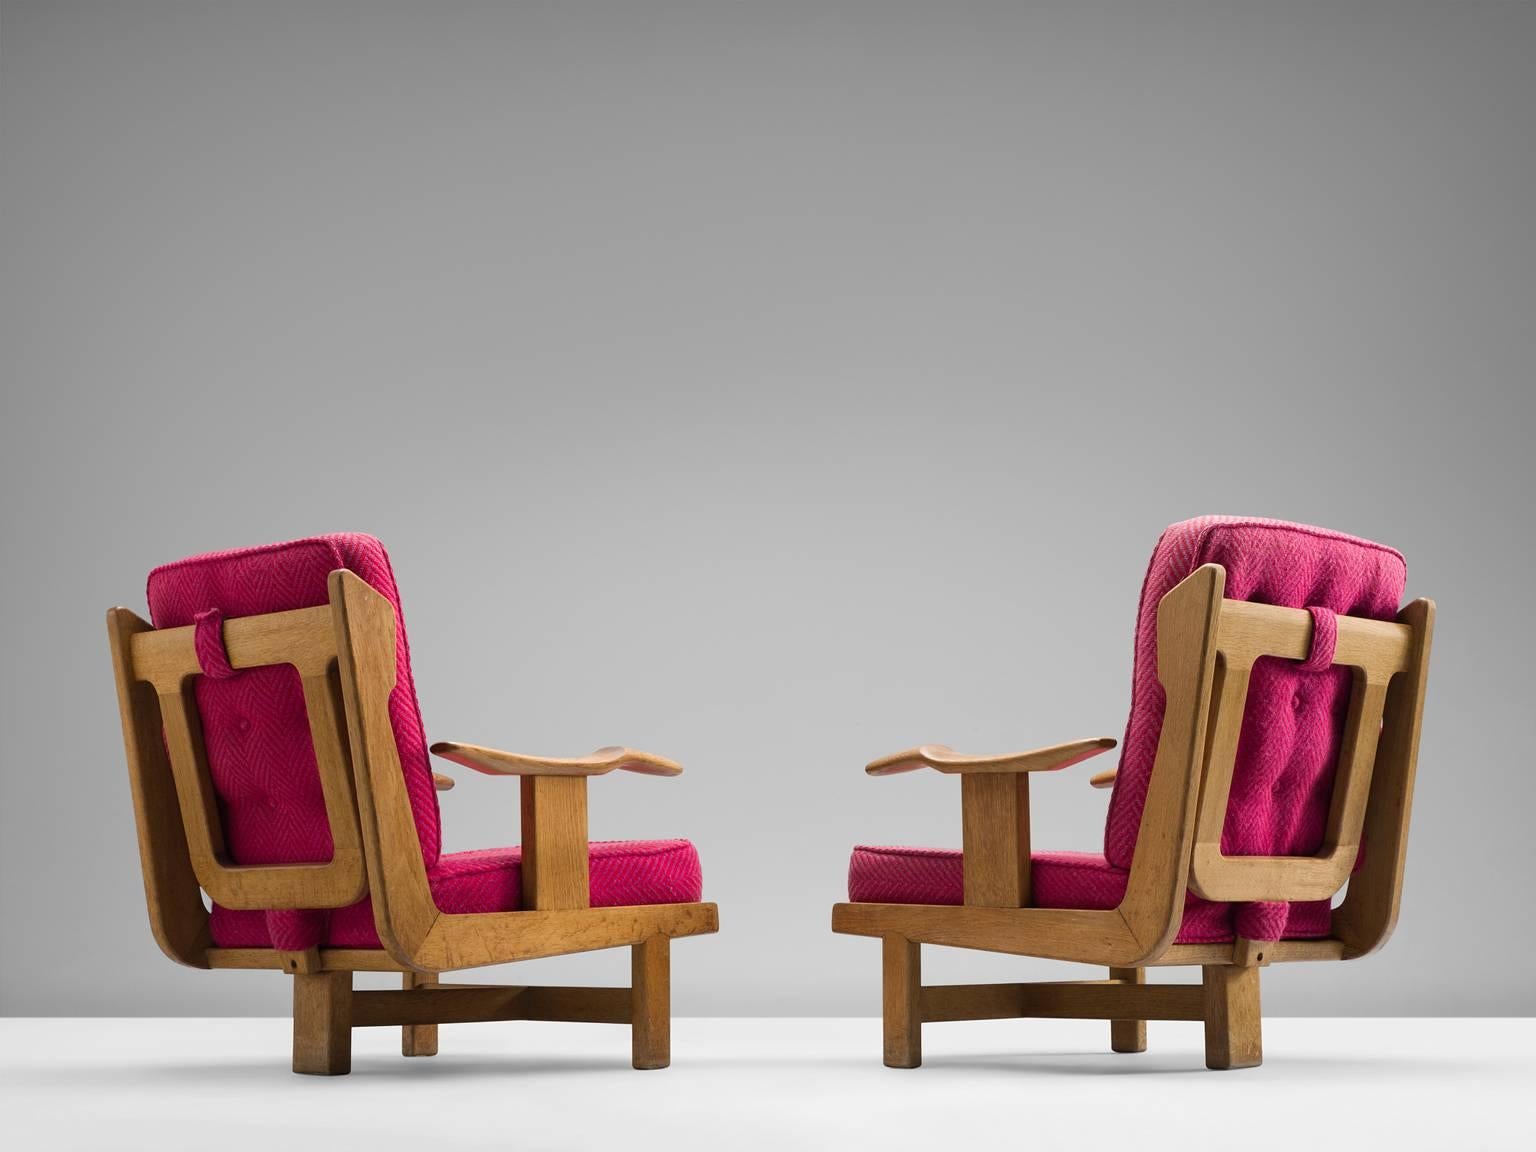 Pair of two tripod lounge chairs in solid oak and pink fabric, designed and crafted by Guillerme & Chambron, France 1960s.

This particular model is quite rare, it shows the wonderful craftsmanship Guillerme & Chambron are well known for.
The